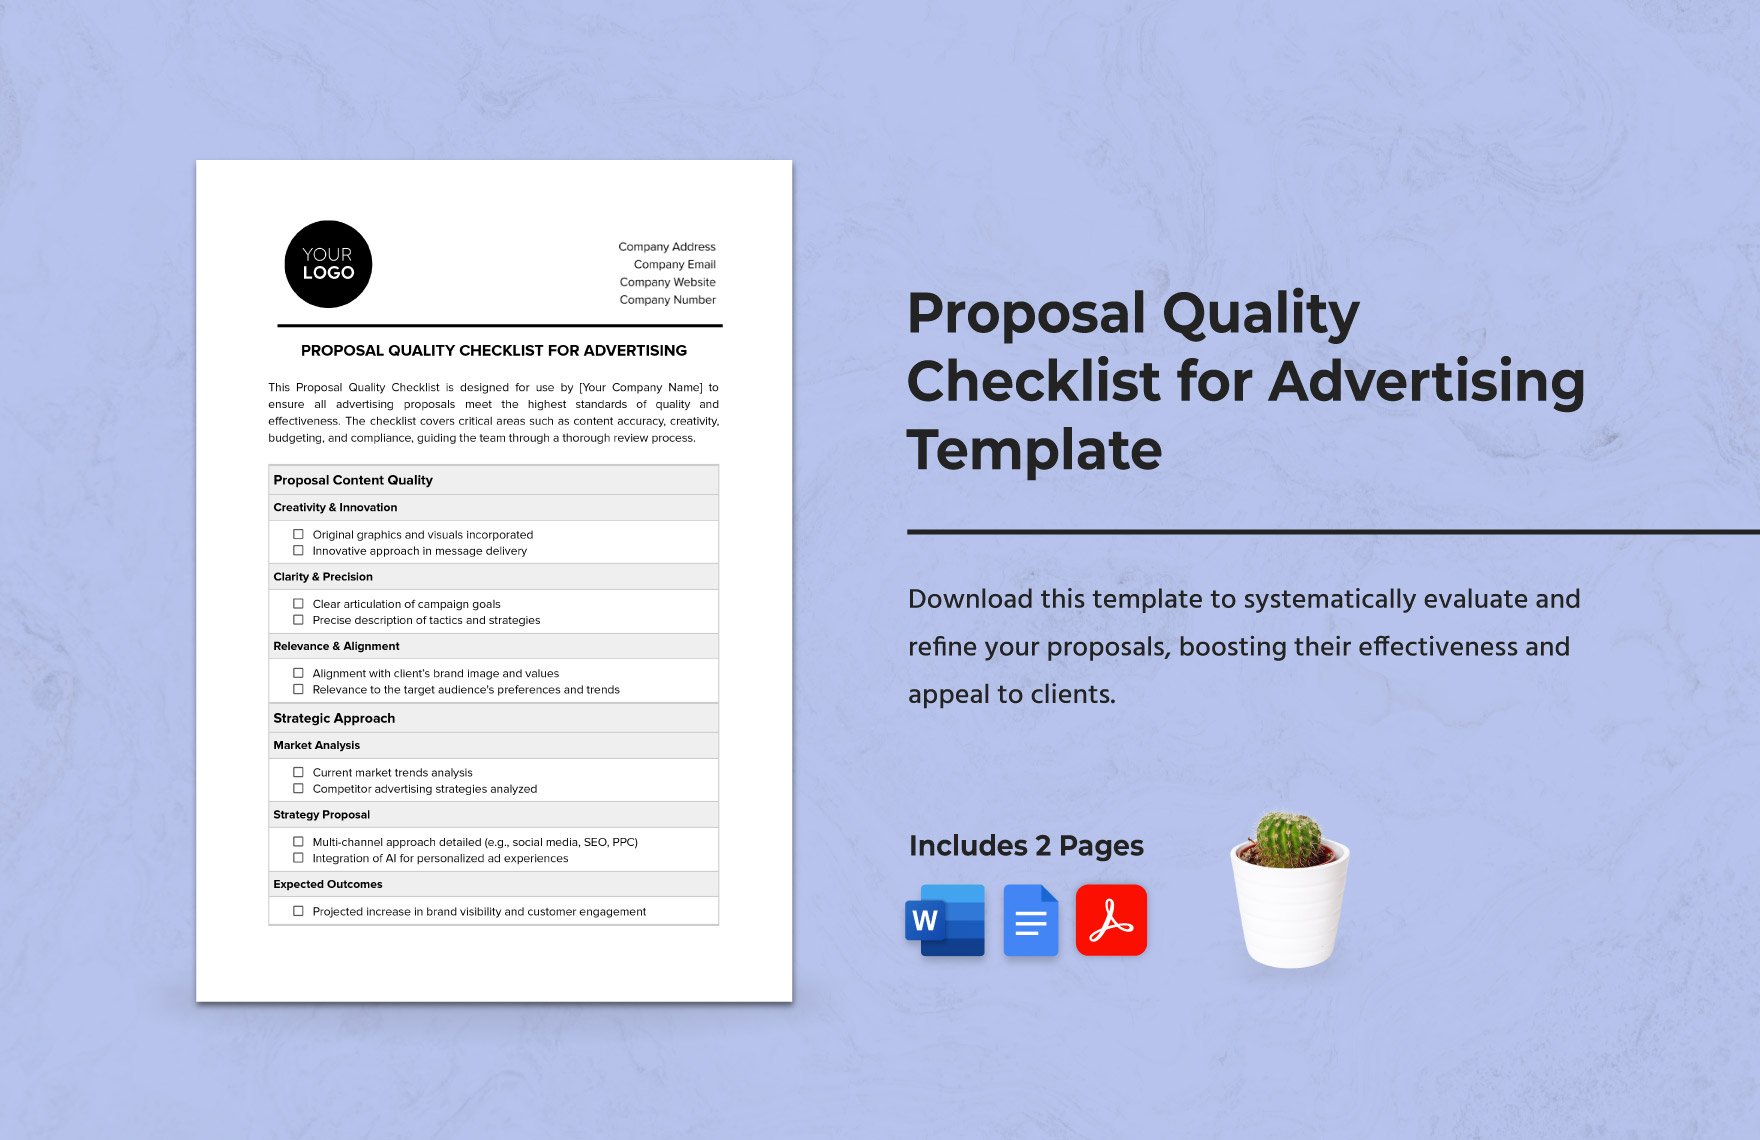 Proposal Quality Checklist for Advertising Template in Word, Google Docs, PDF